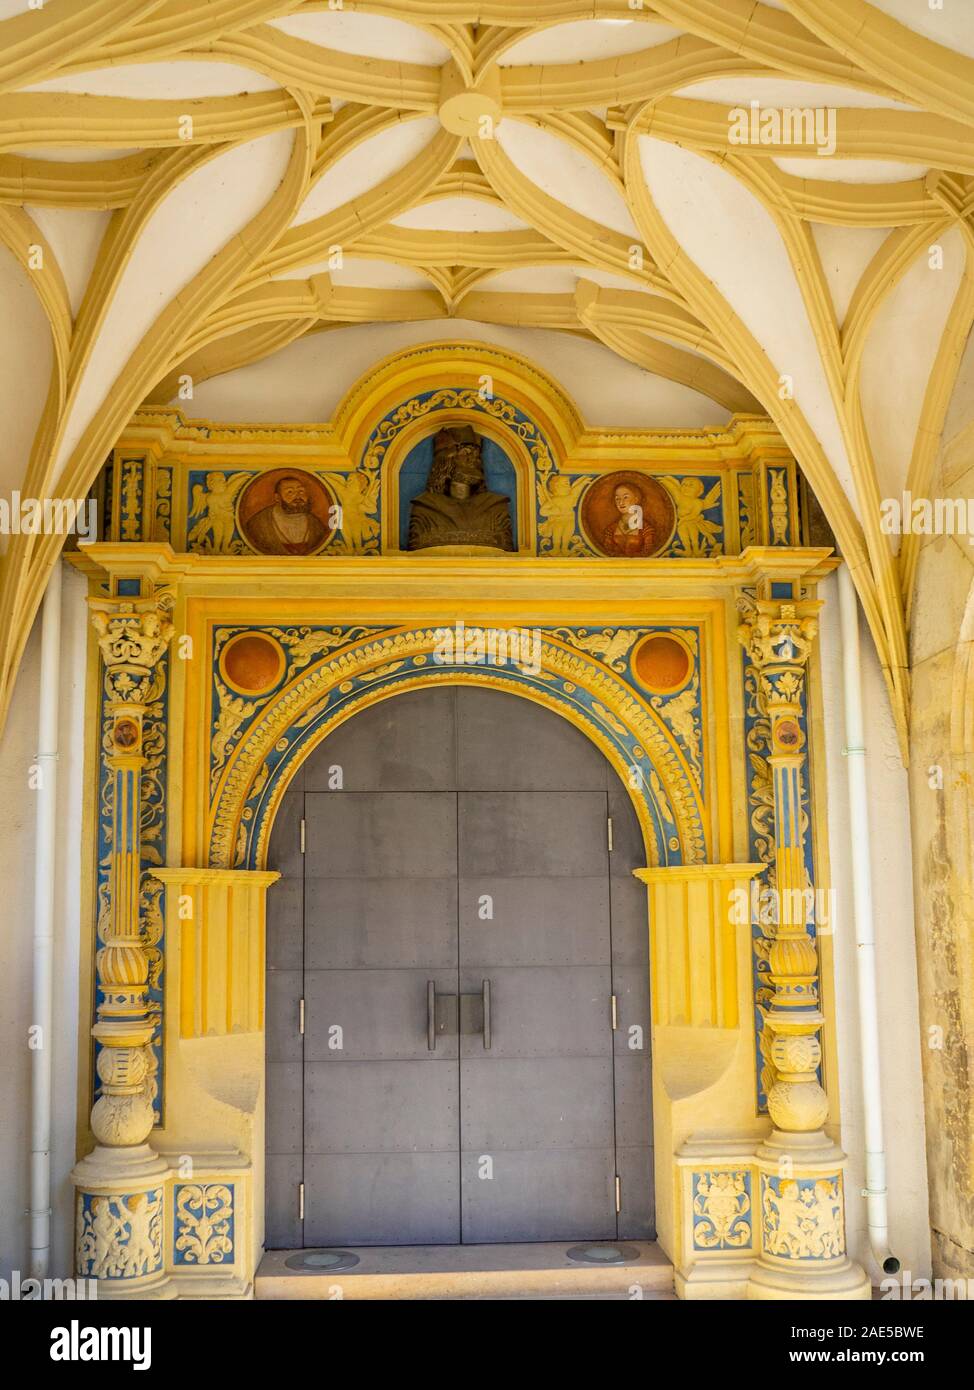 Decorative stone carvings of architrave and vaulted ceiling at base of Grosse Wendelstein in courtyard of Castle Hartenfels Torgau Saxony Germany Stock Photo